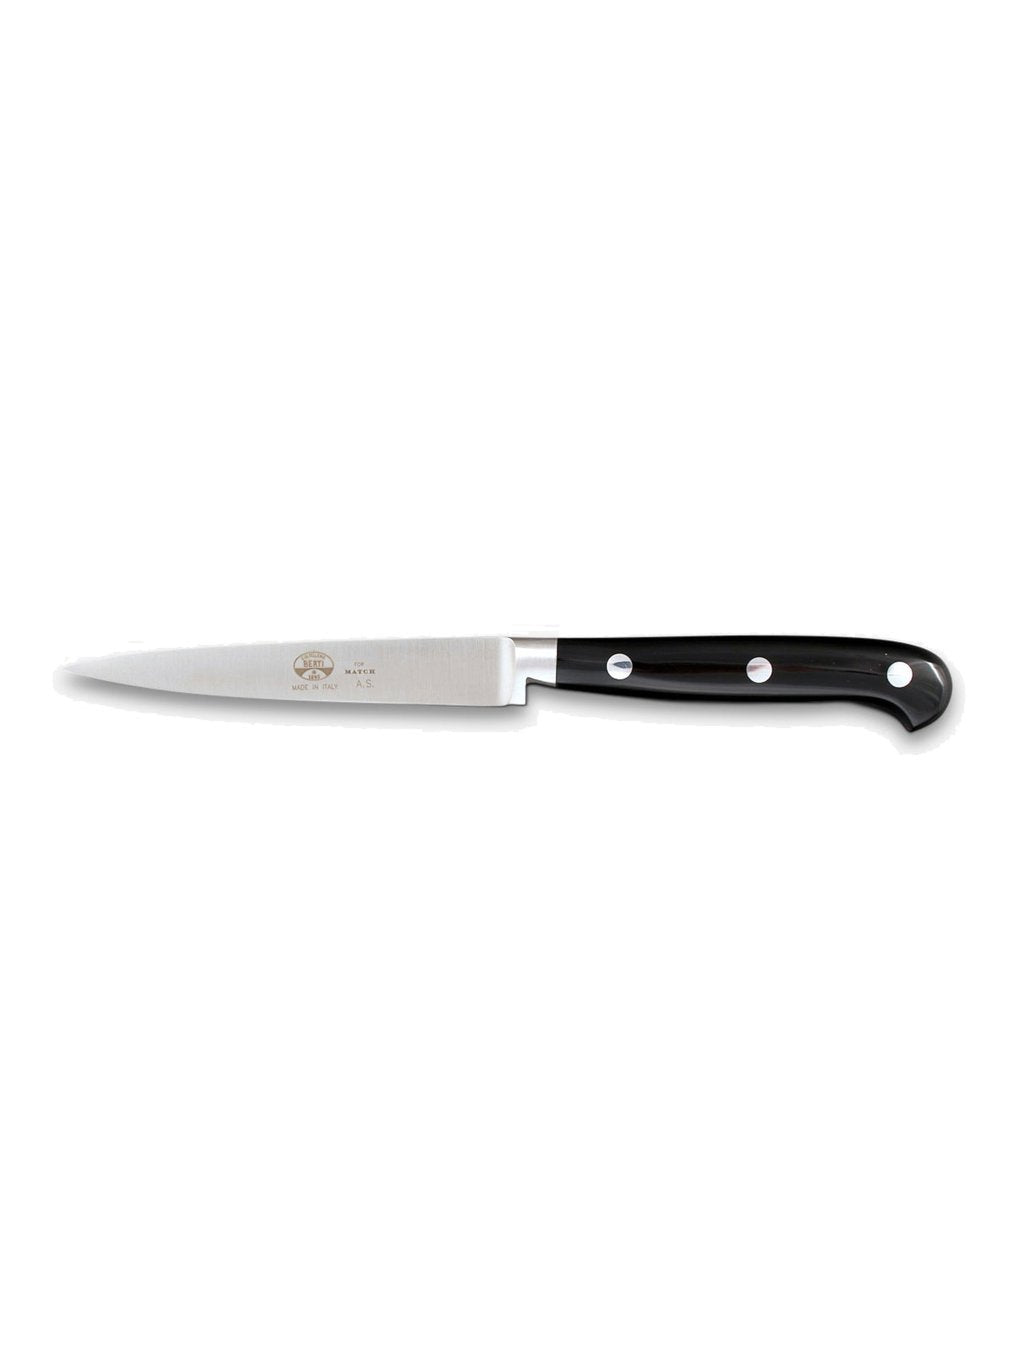 Straight Paring knife, 4.25&quot; Blade Black Lucite Handle